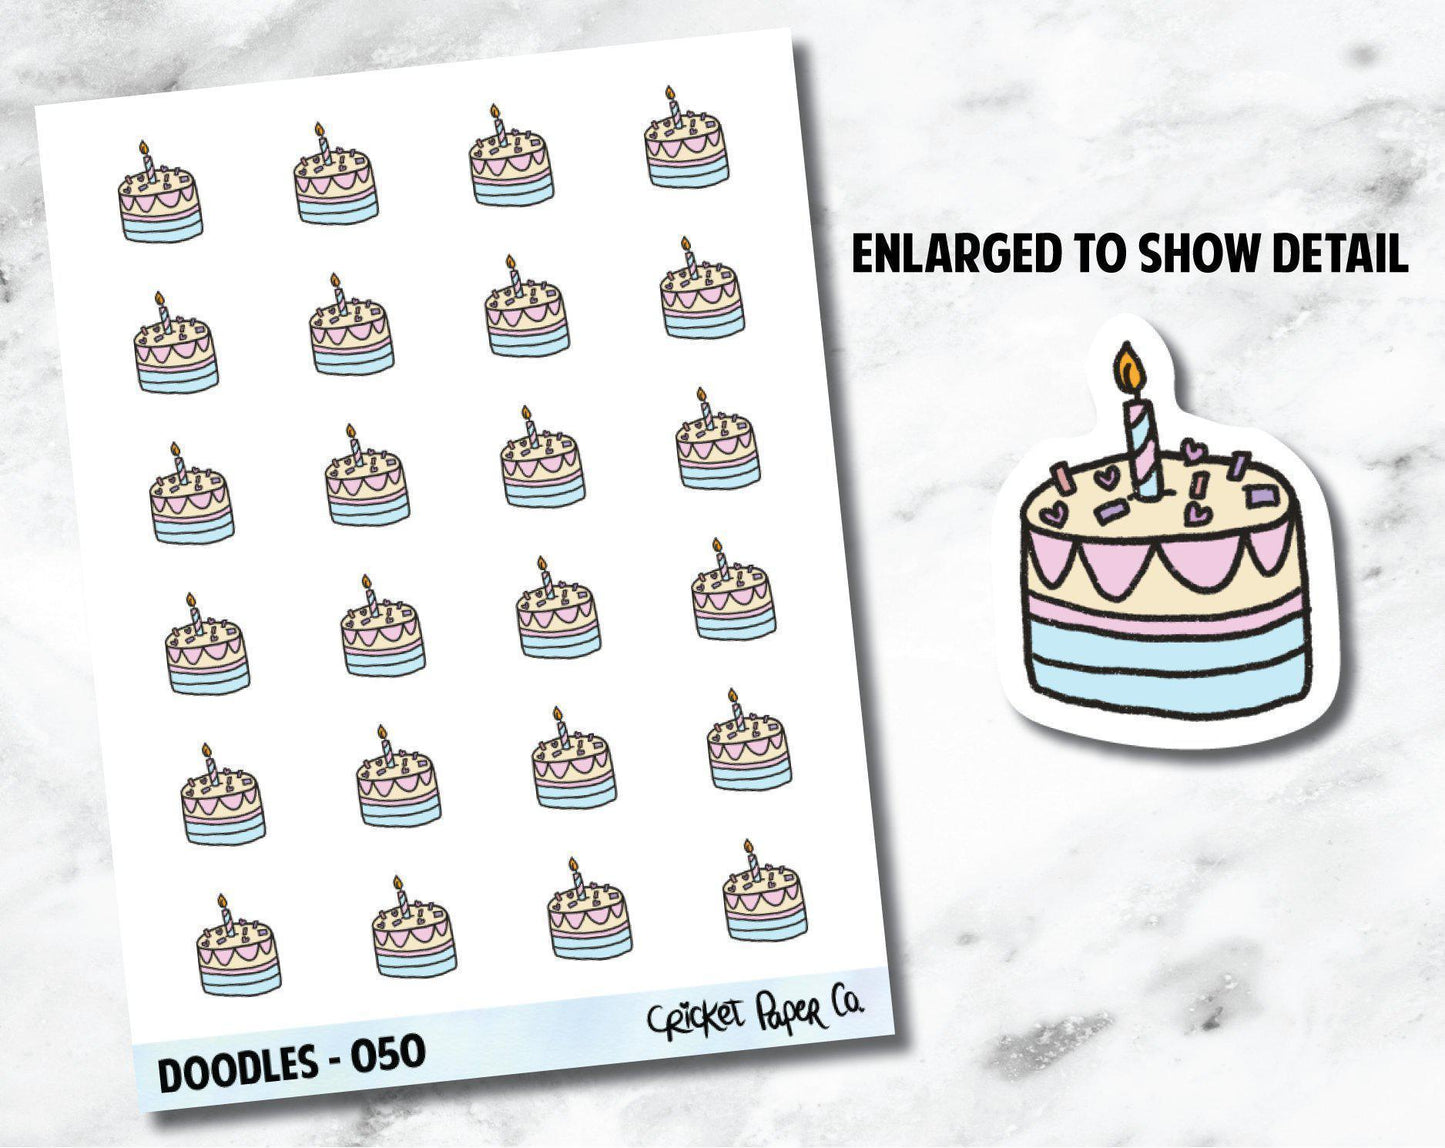 Birthday Cake, Celebration, Party Hand Drawn Doodles - 050-Cricket Paper Co.